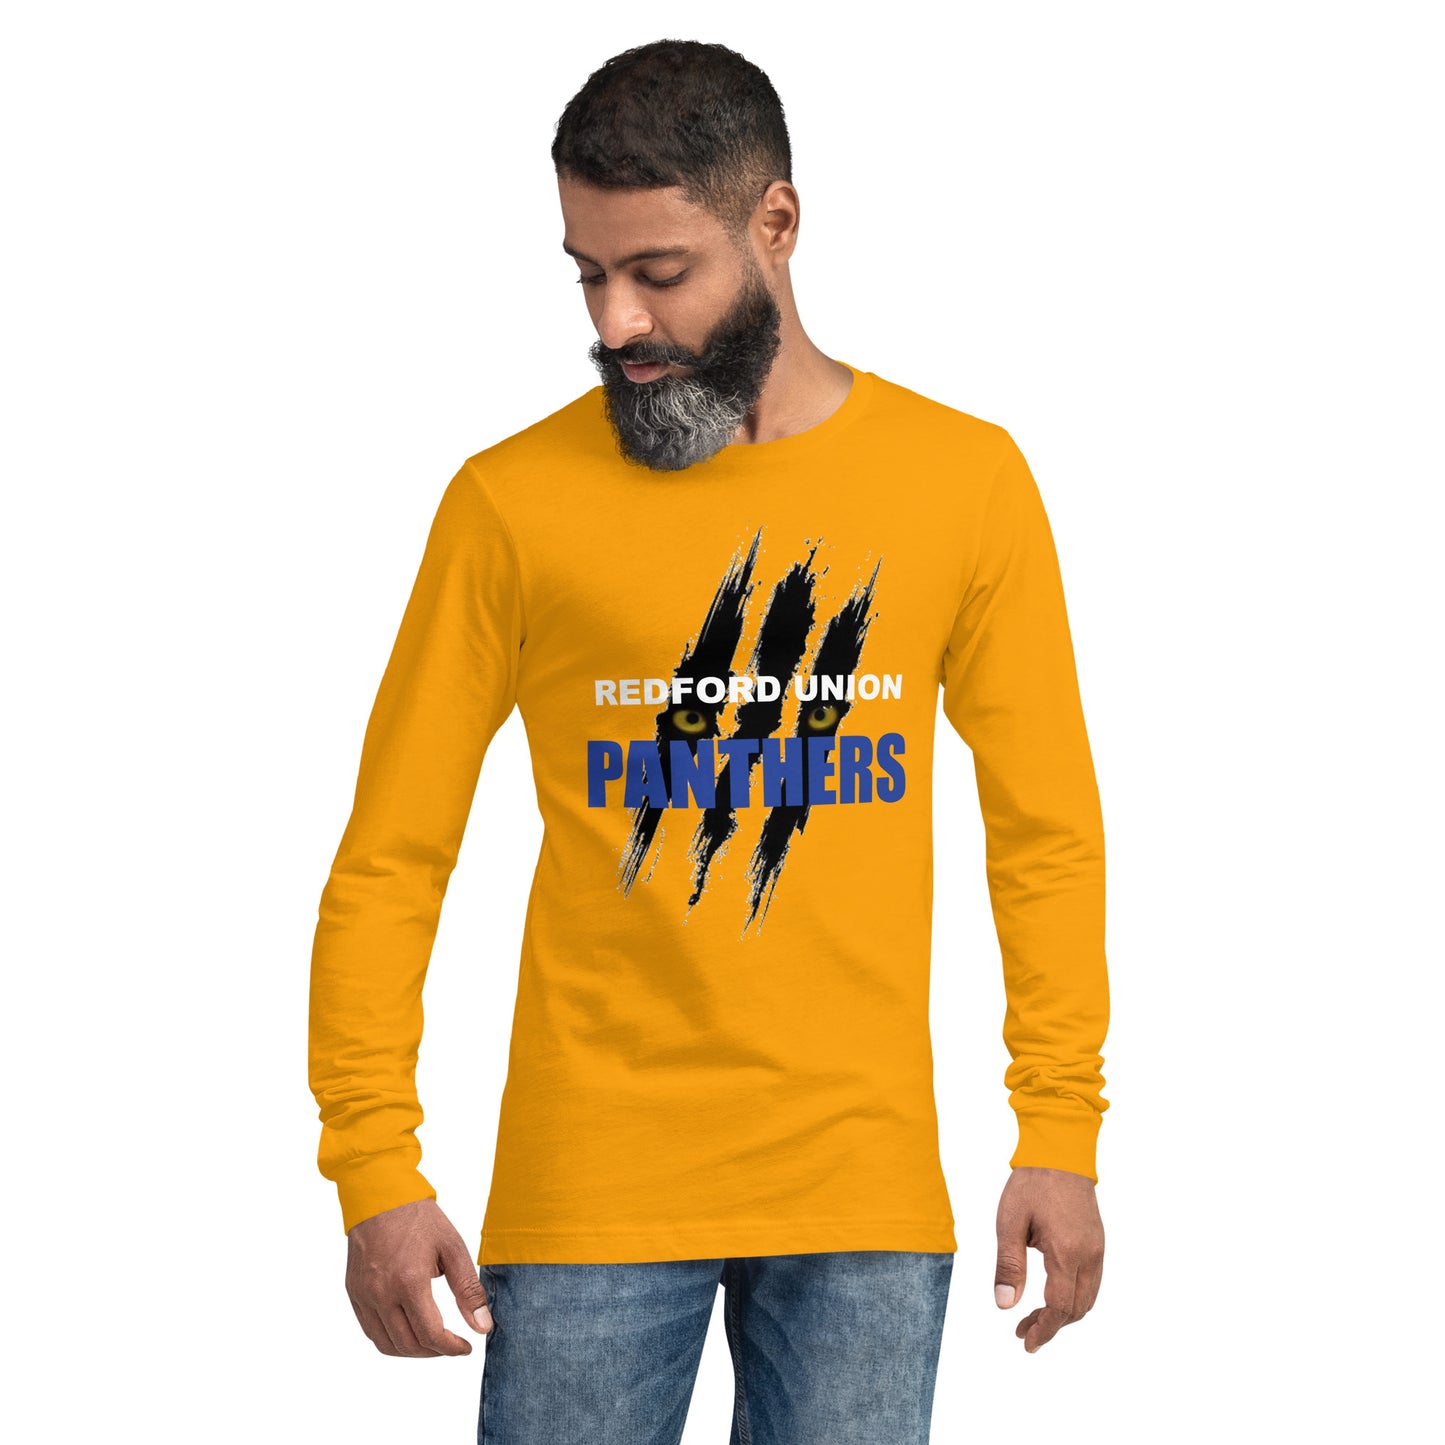 Redford Union Panthers - Yellow Long Sleeve